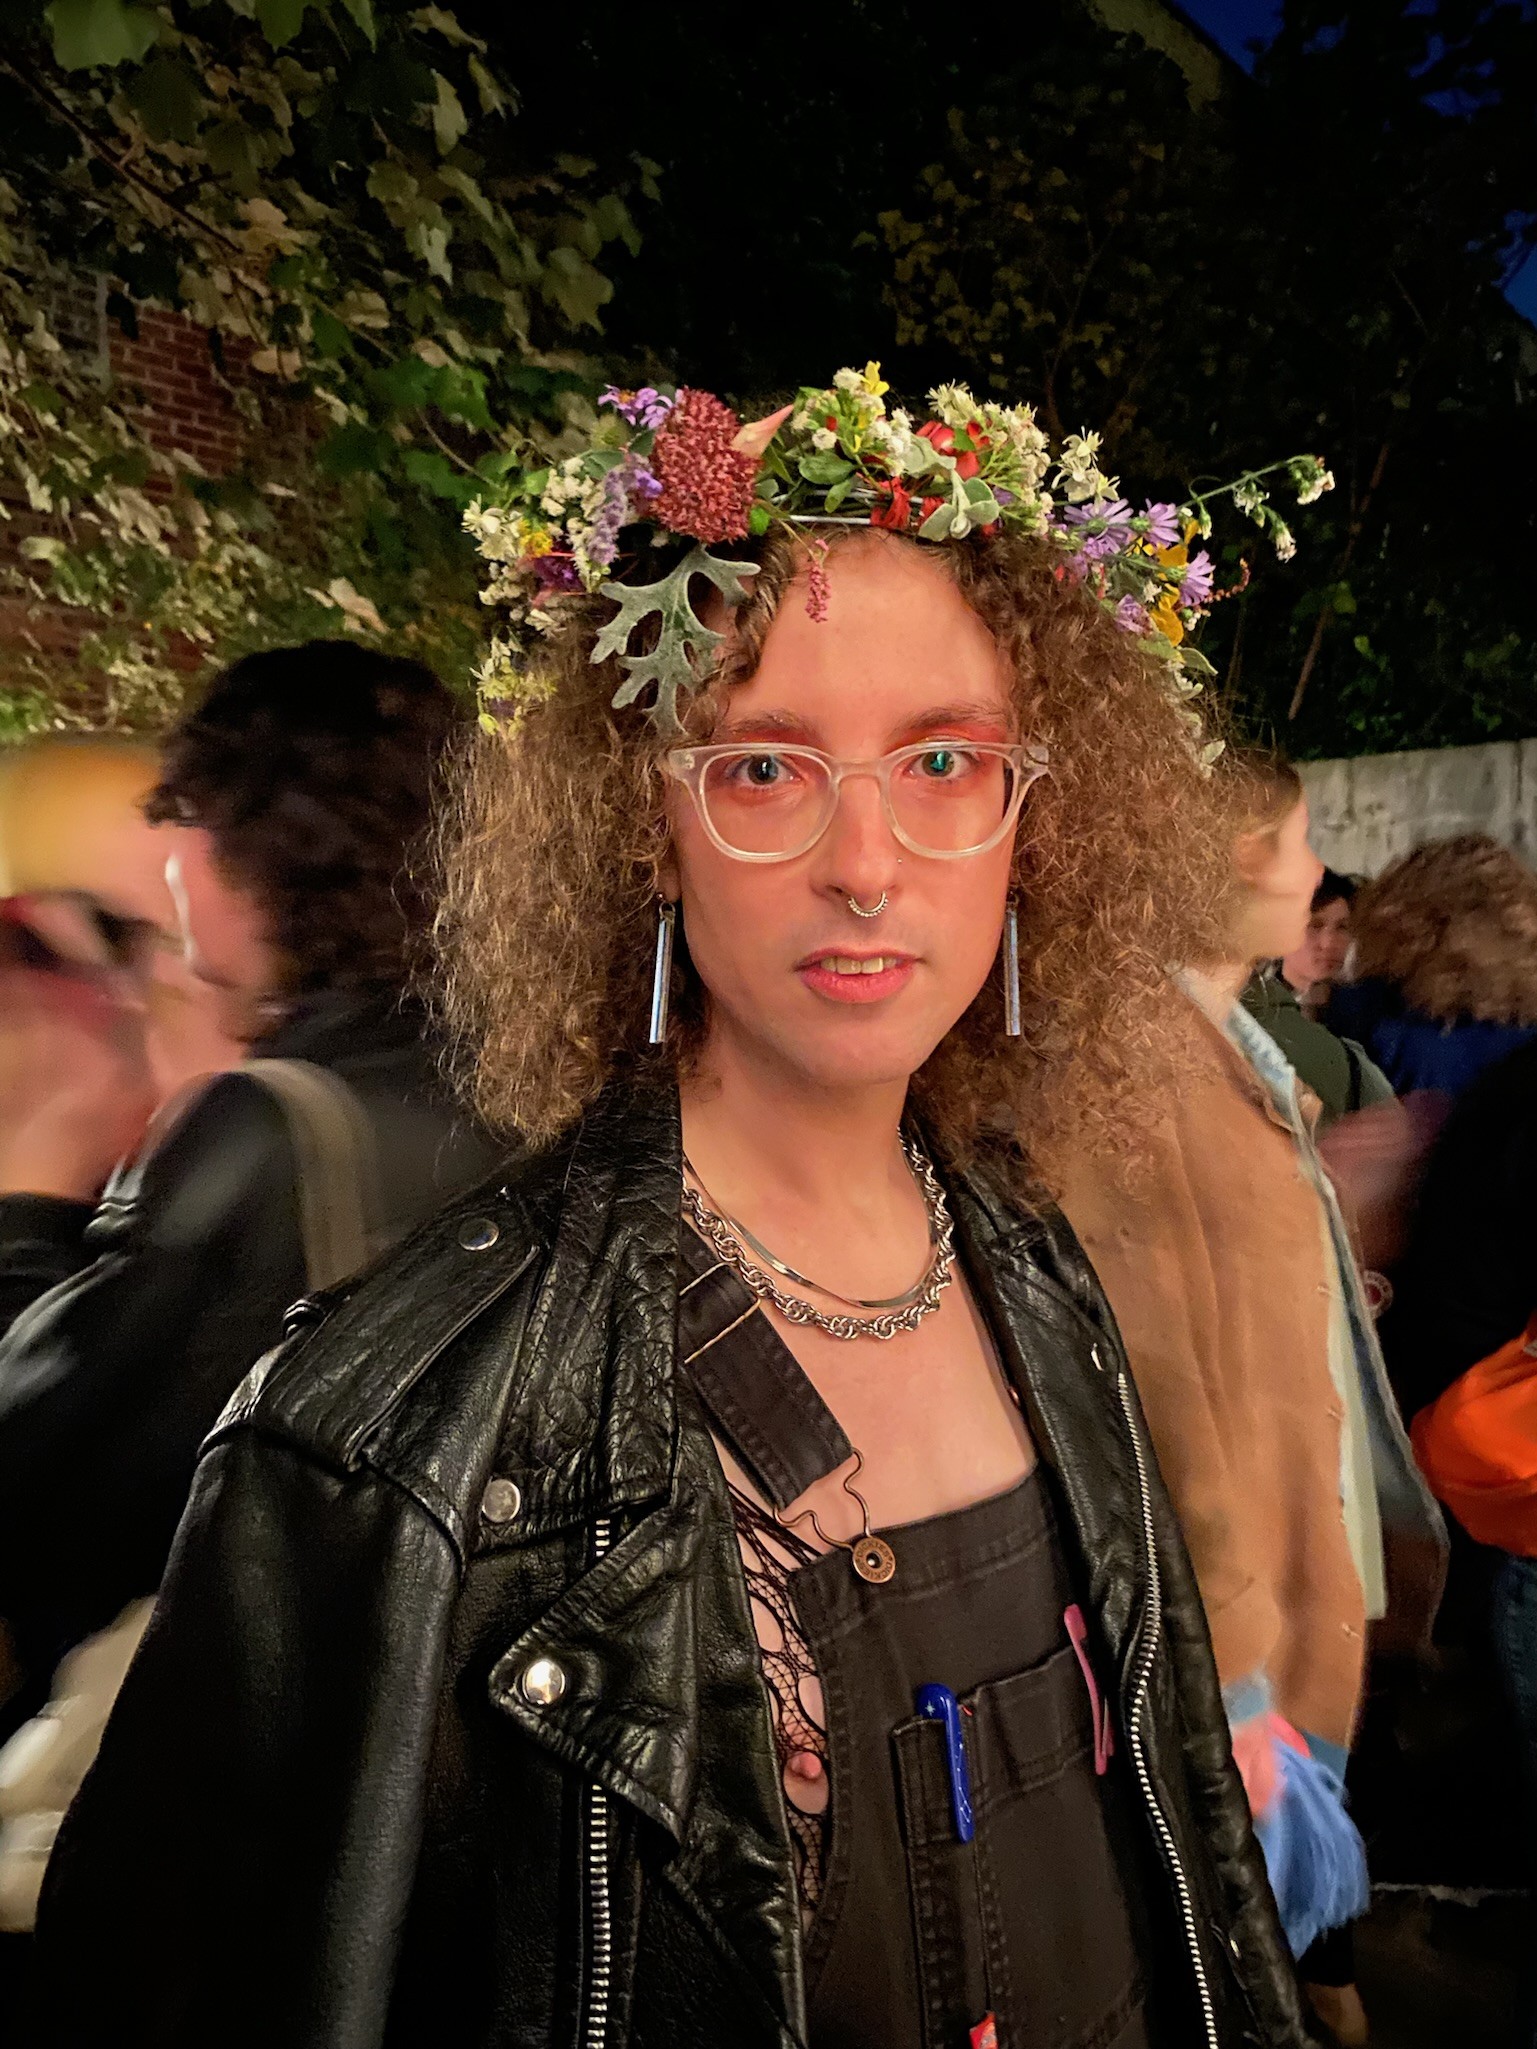 imogen is featured in a portrait-oriented picture cropped from mid-waist up. They are wearing black overalls, a black leather jacket, dangly earrings, large clear enamel-framed glasses, and a flower crown. Behind appears to be an outdoor party. Trees and blurs of people are visible in the background.